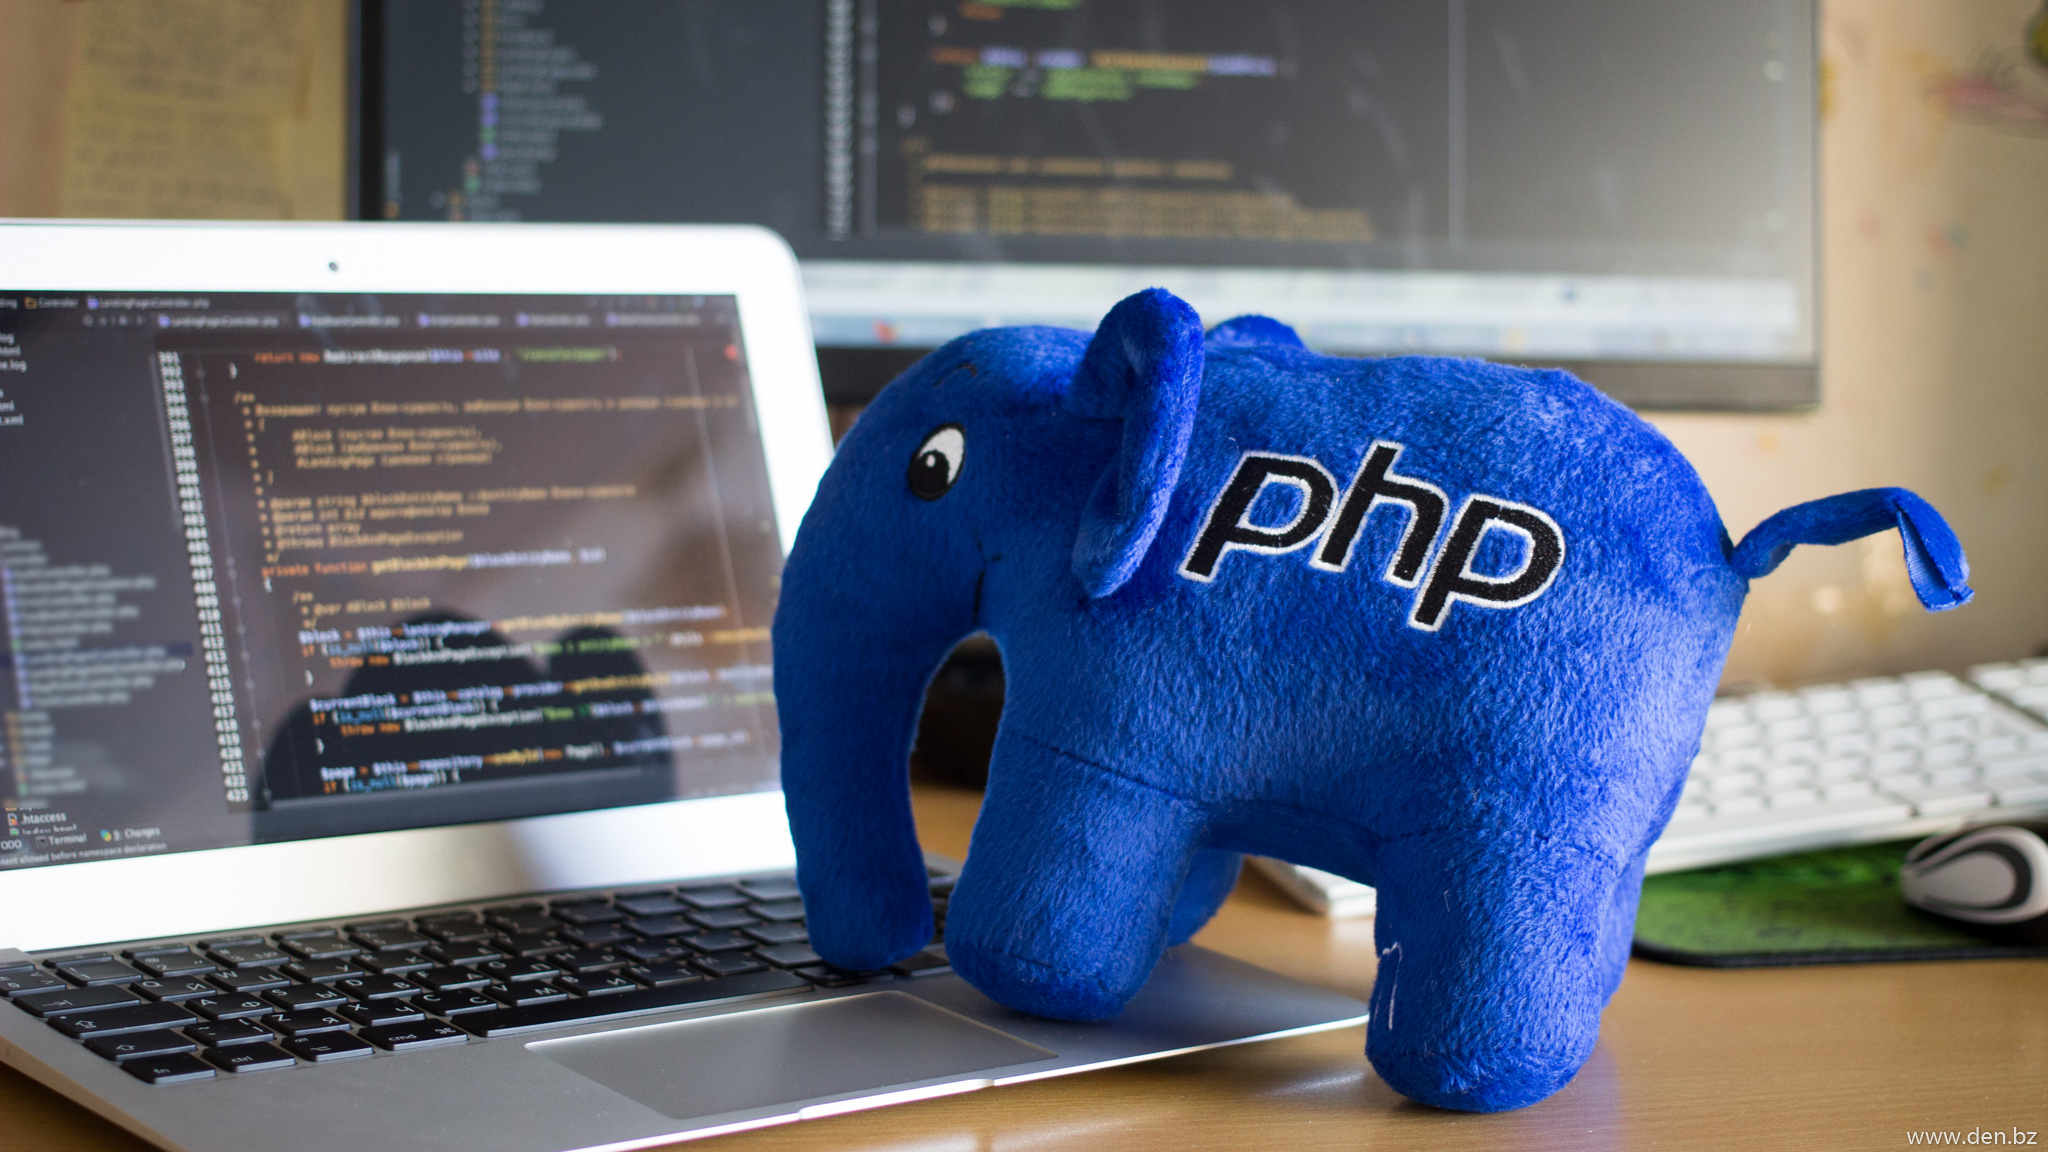 Php internals. Php. Php язык программирования. Php программирование. Php слон.